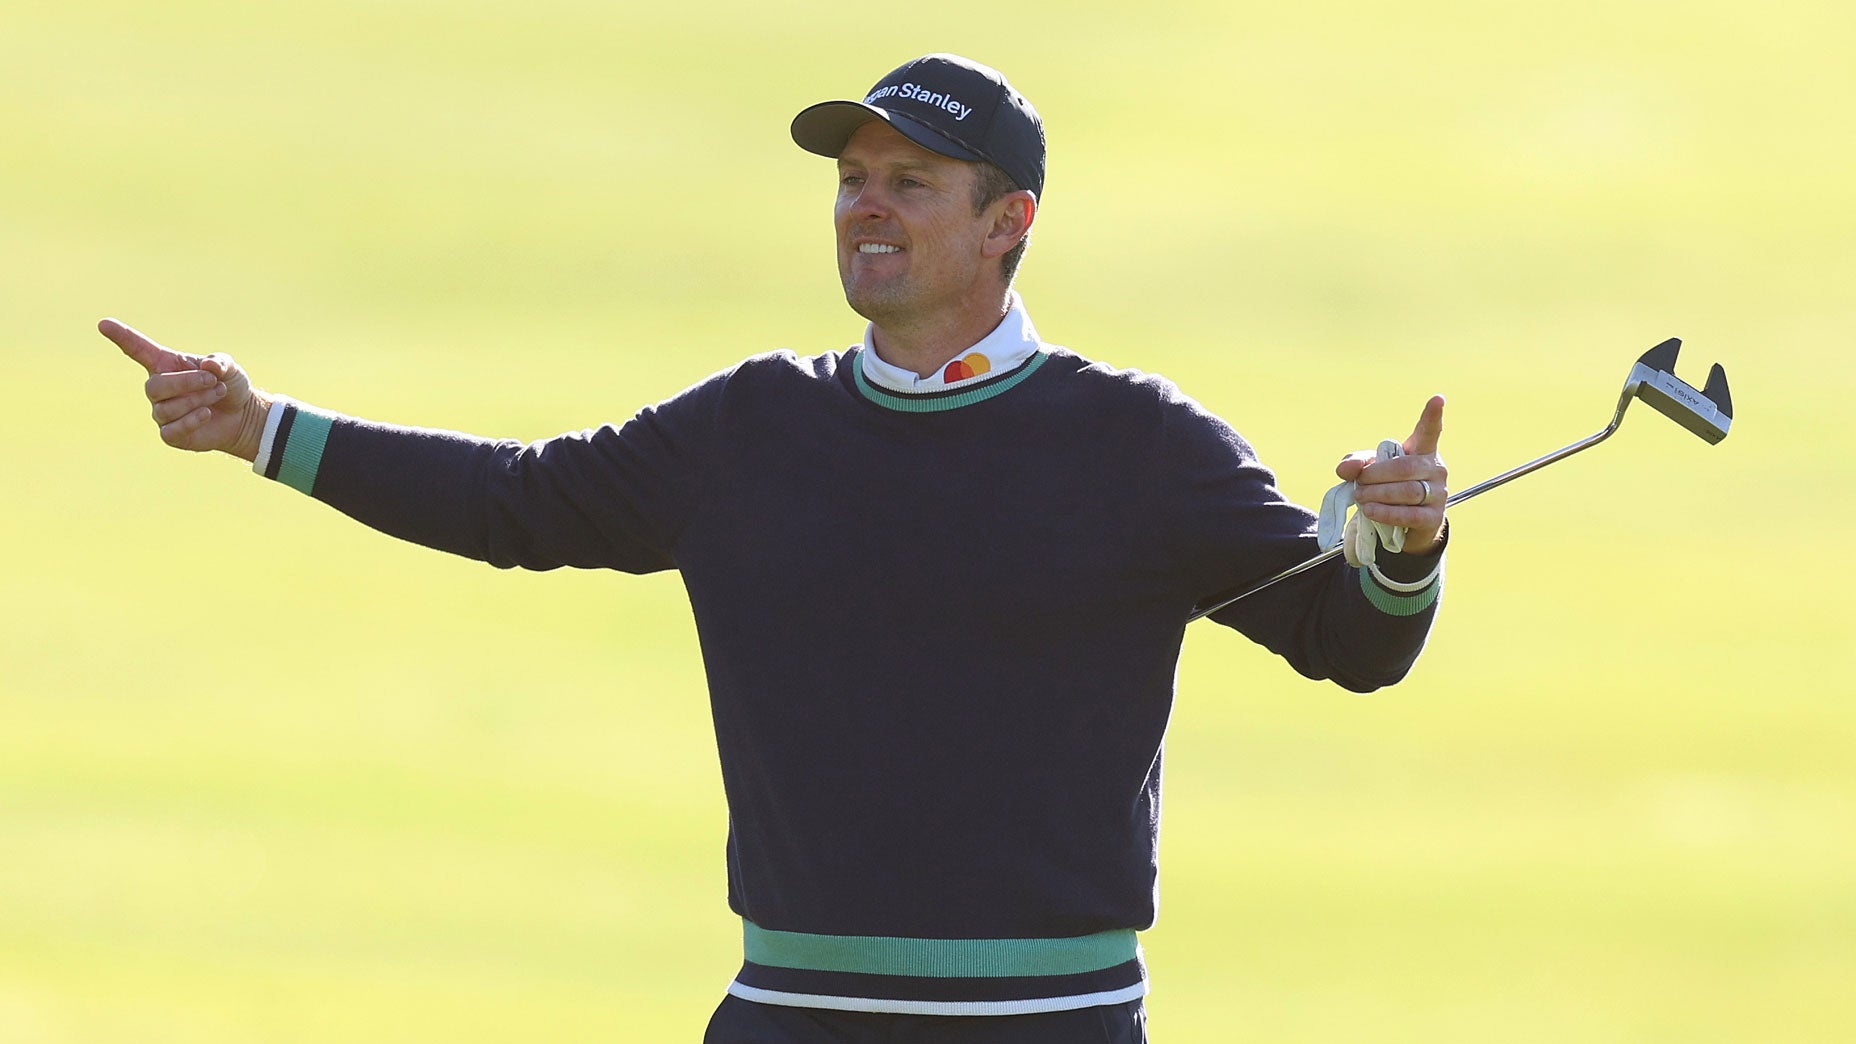 Justin Rose of England reacts on the 15th hole during the continuation of the final round of the AT&T Pebble Beach Pro-Am at Pebble Beach Golf Links on February 06, 2023 in Pebble Beach, California.